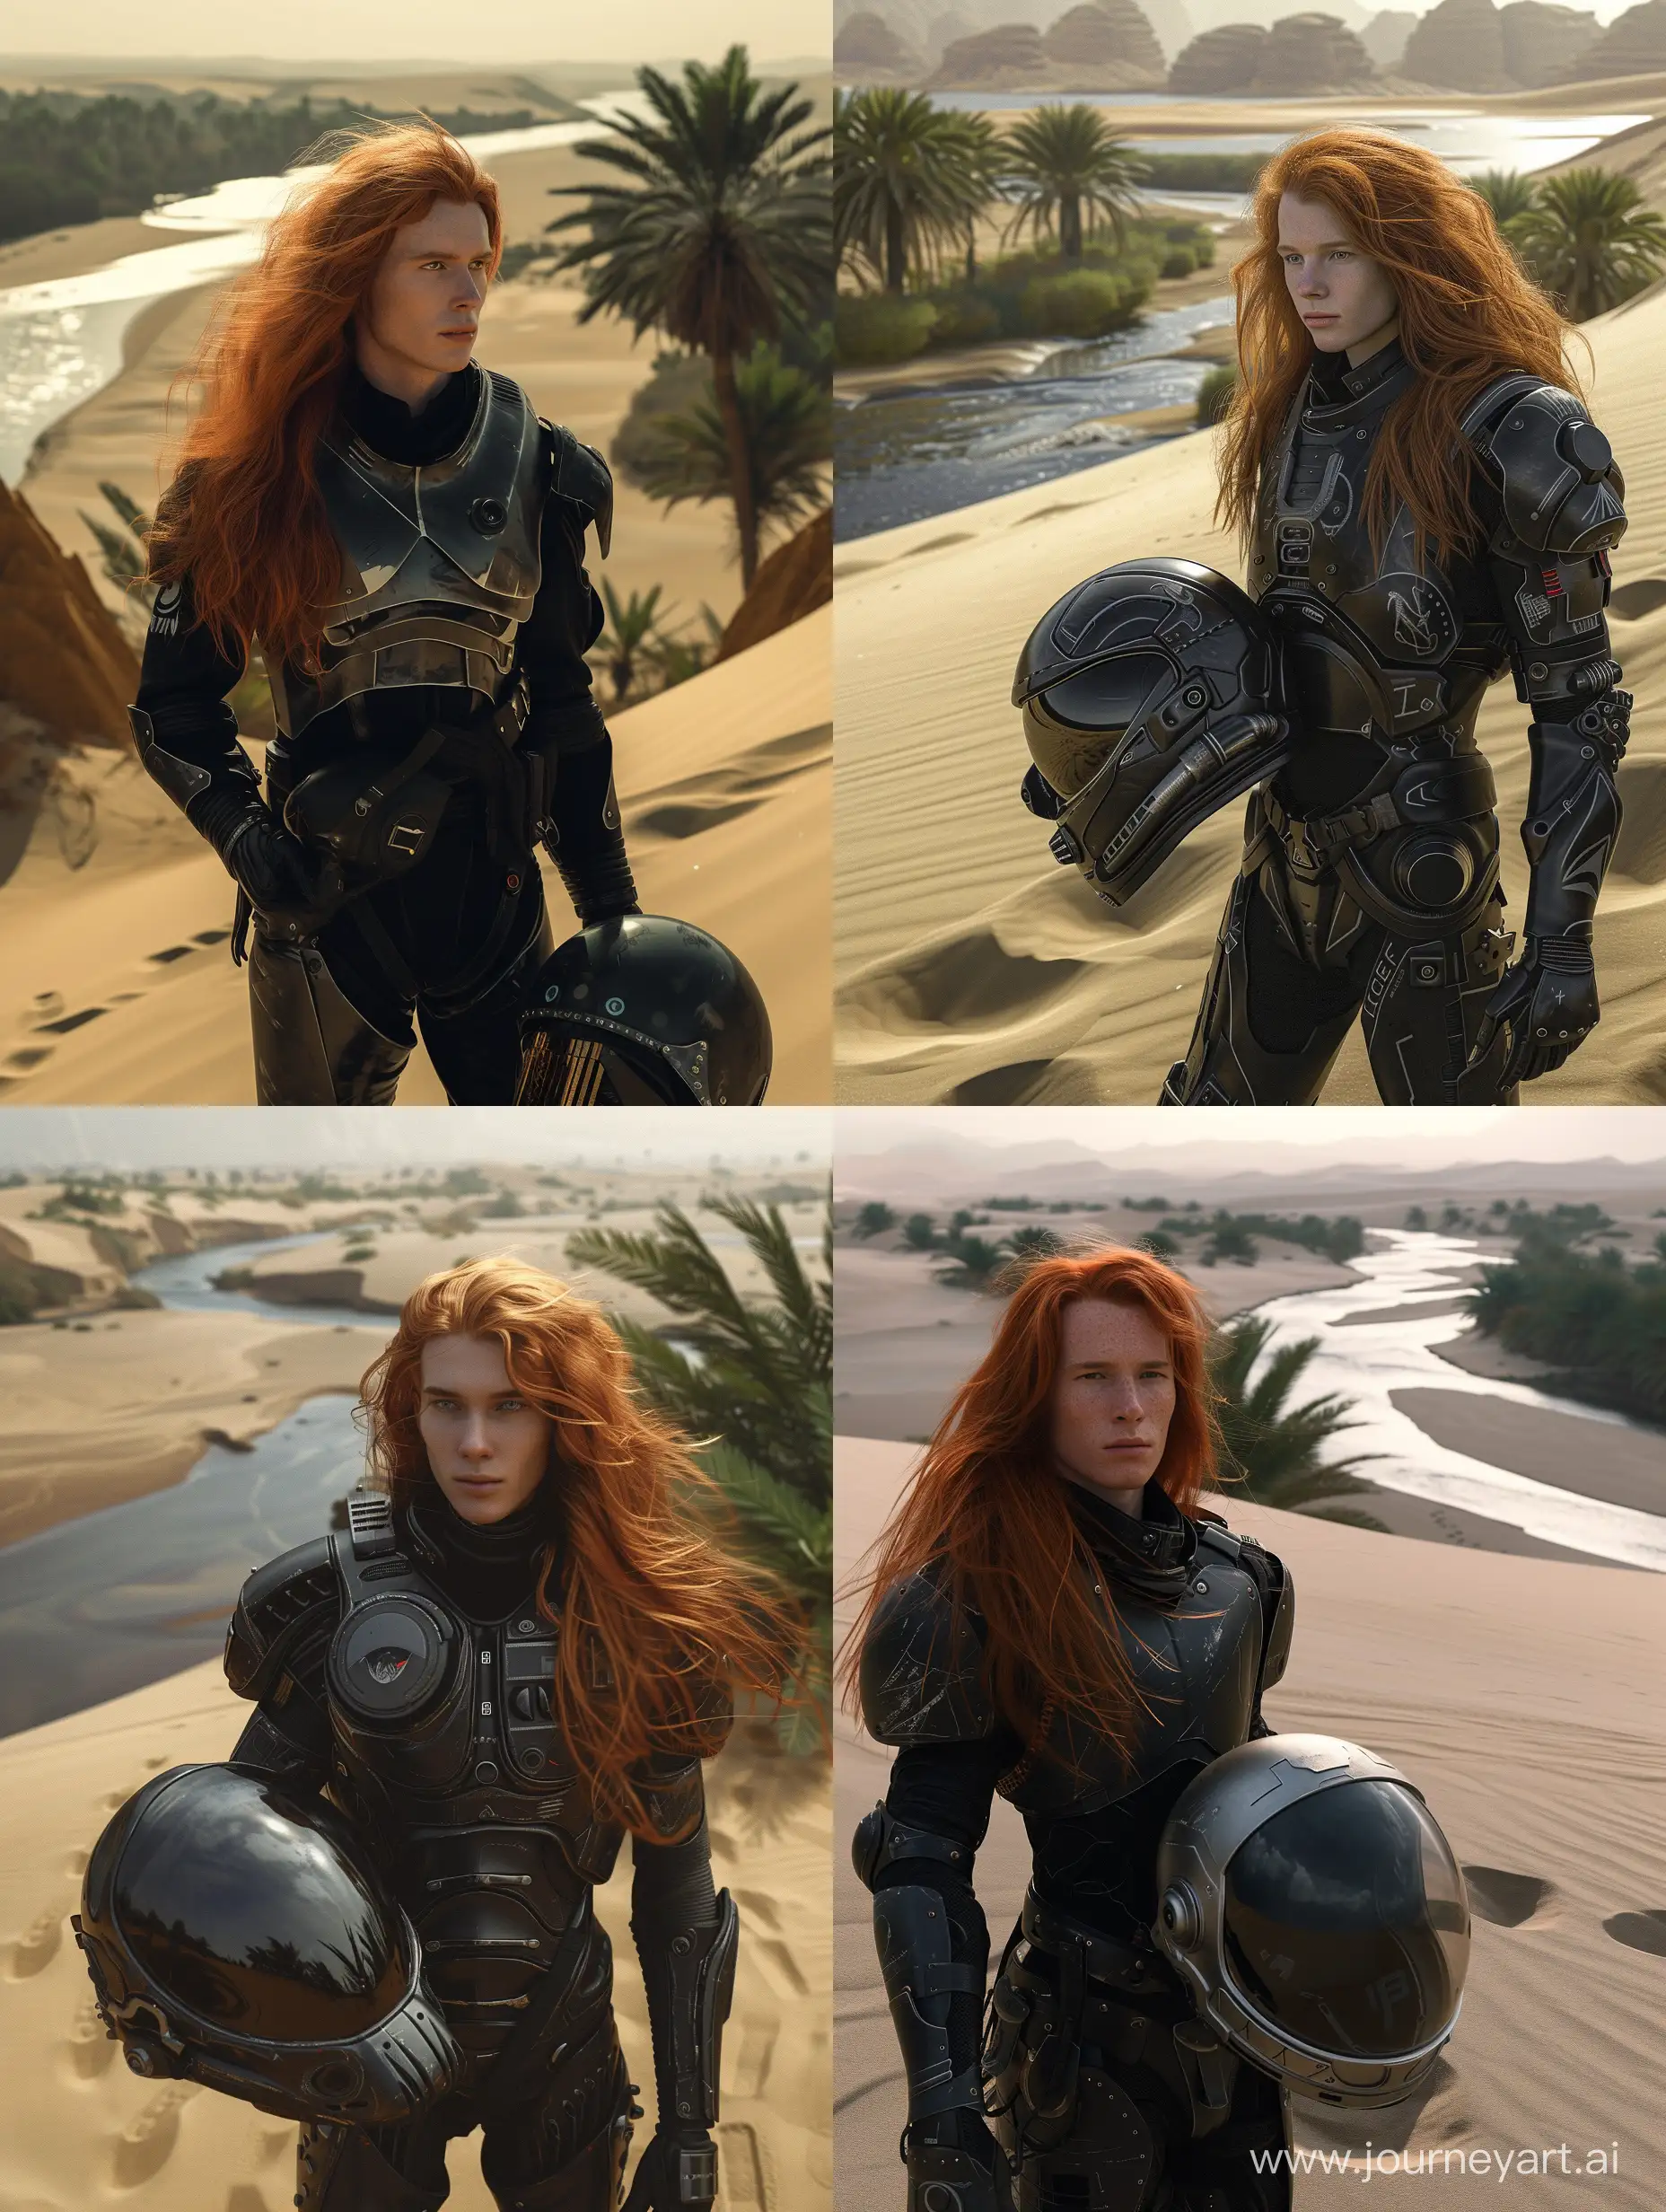 18YearOld-Man-in-Space-Armor-with-Red-Hair-Holding-Helmet-amidst-Desert-Dunes-and-Palms